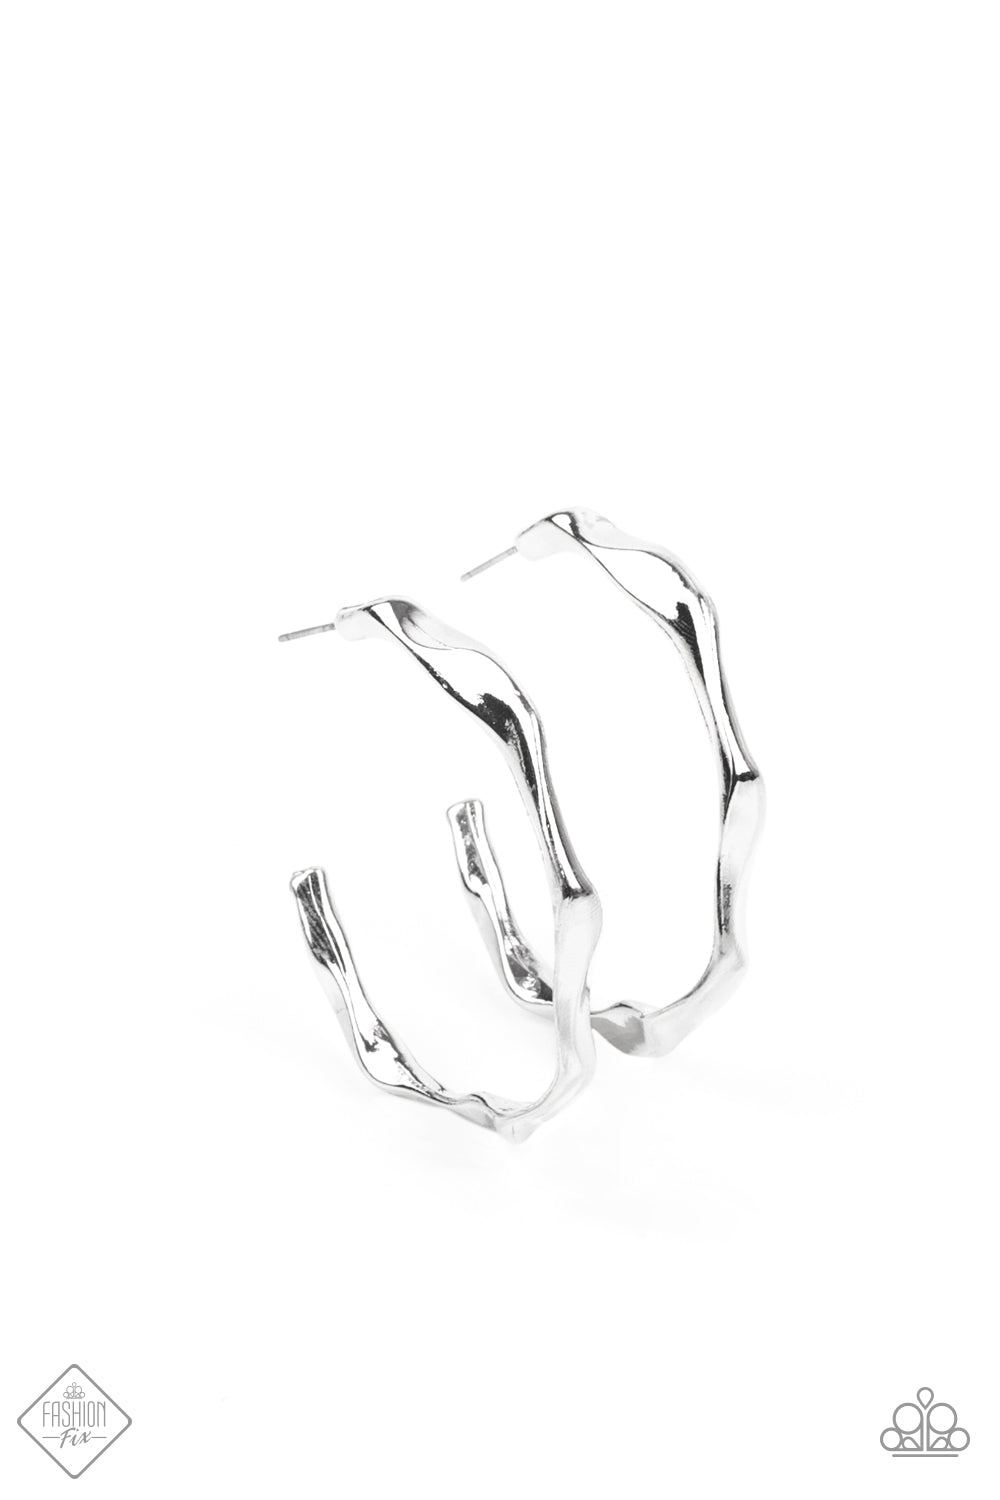 Paparazzi Coveted Curves Silver Post Hoop Earrings - Fashion Fix Sunset Sightings June 2021